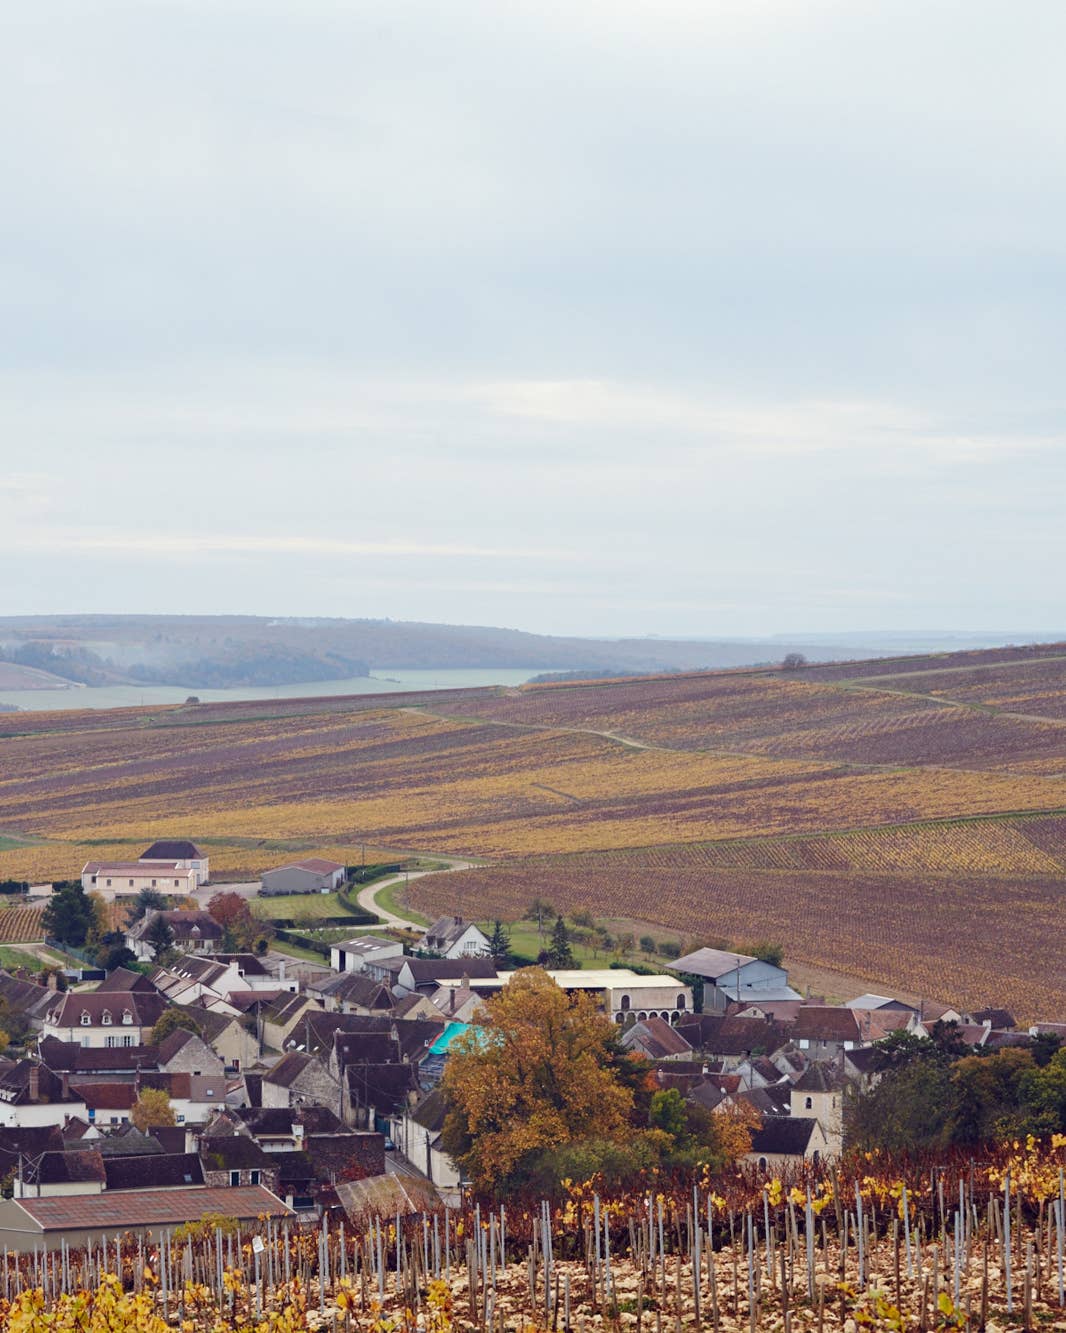 Scenes from Chablis